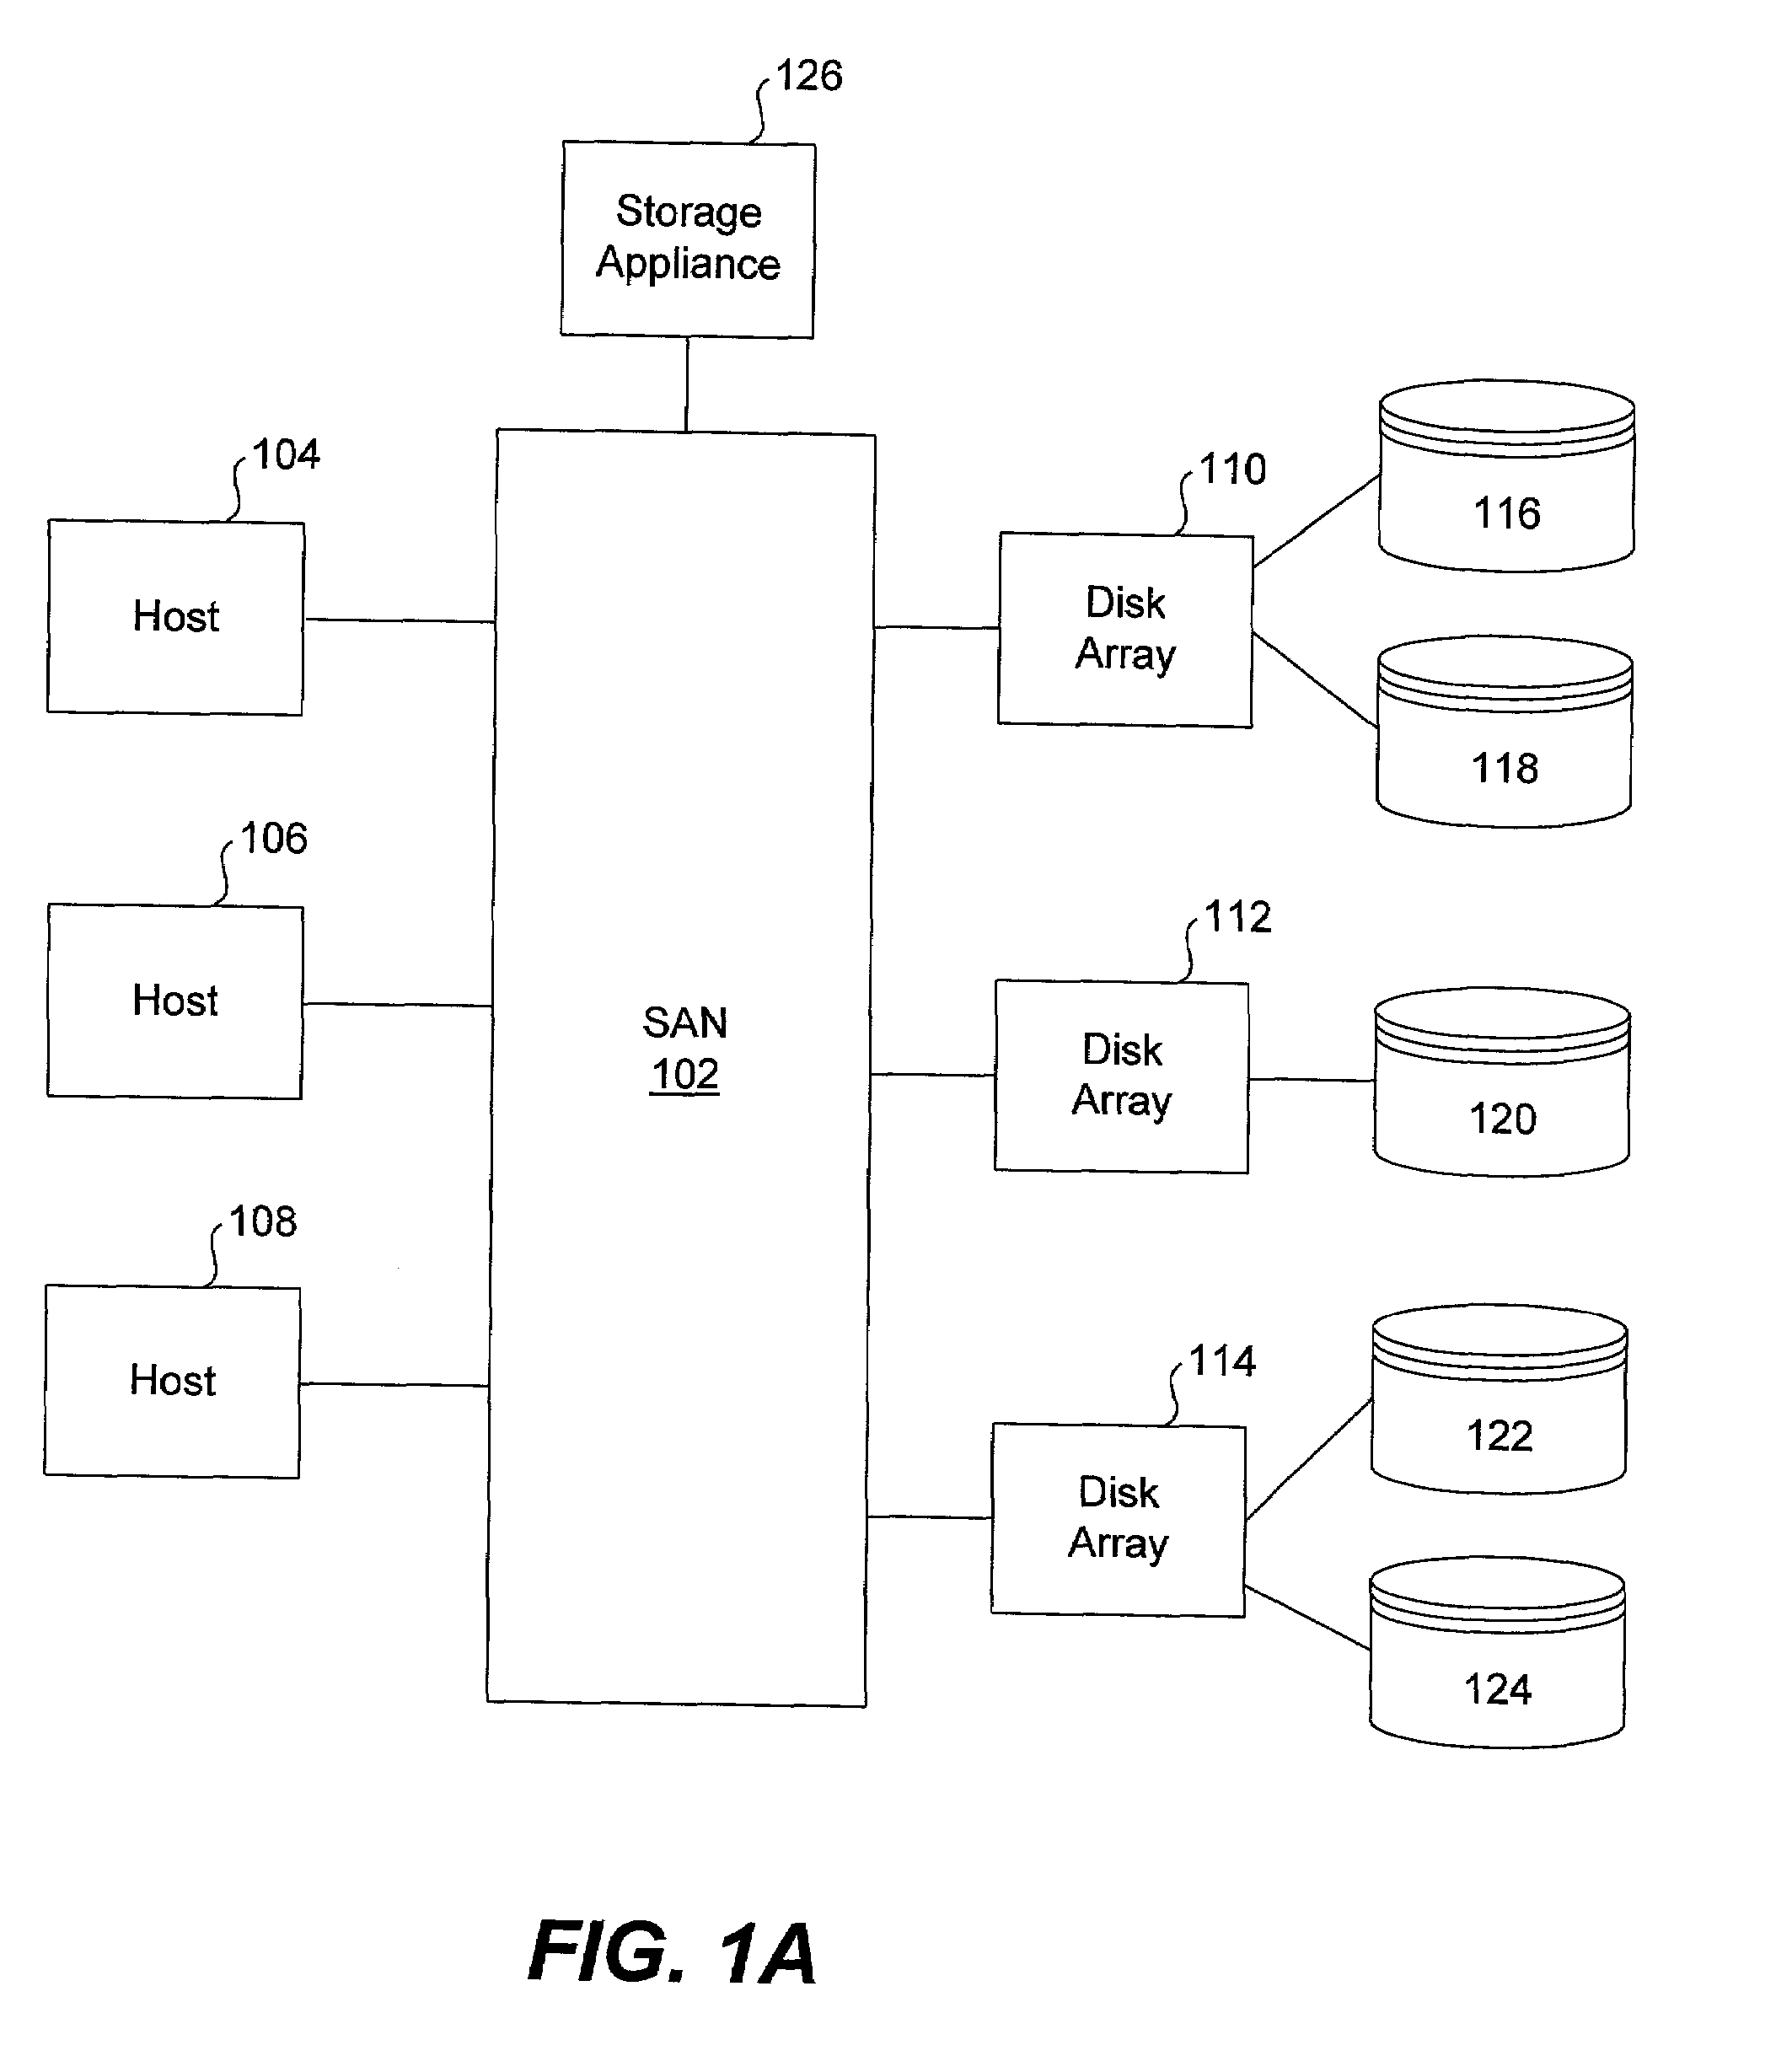 Methods and apparatus for implementing virtualization of storage within a storage area network